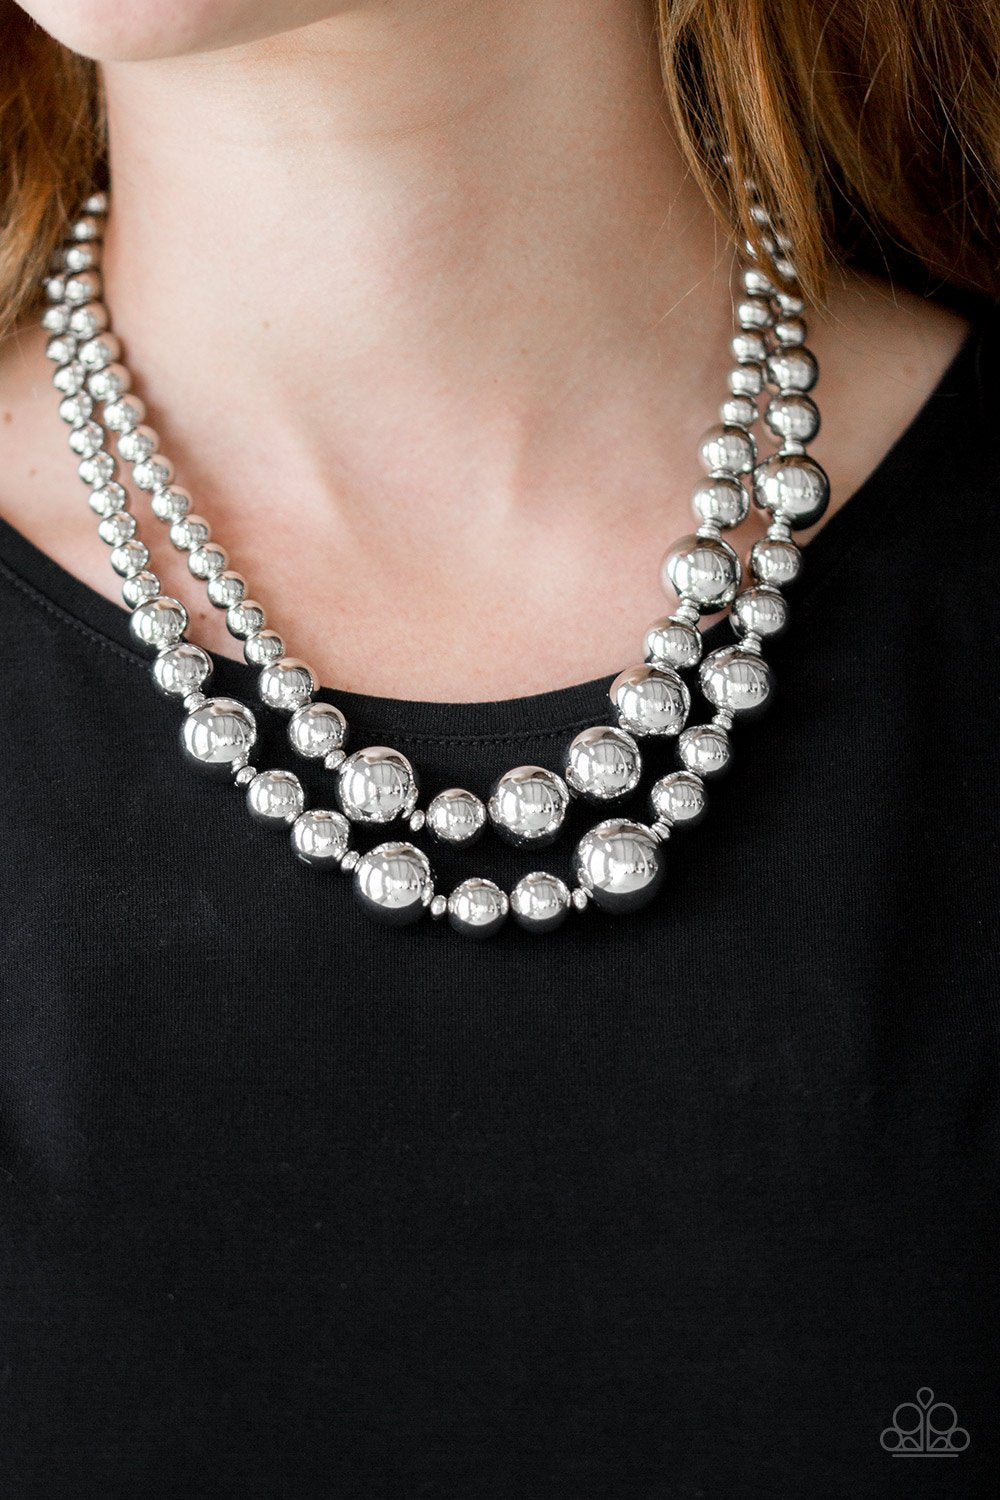 I Double Dare You-silver-Paparazzi necklace